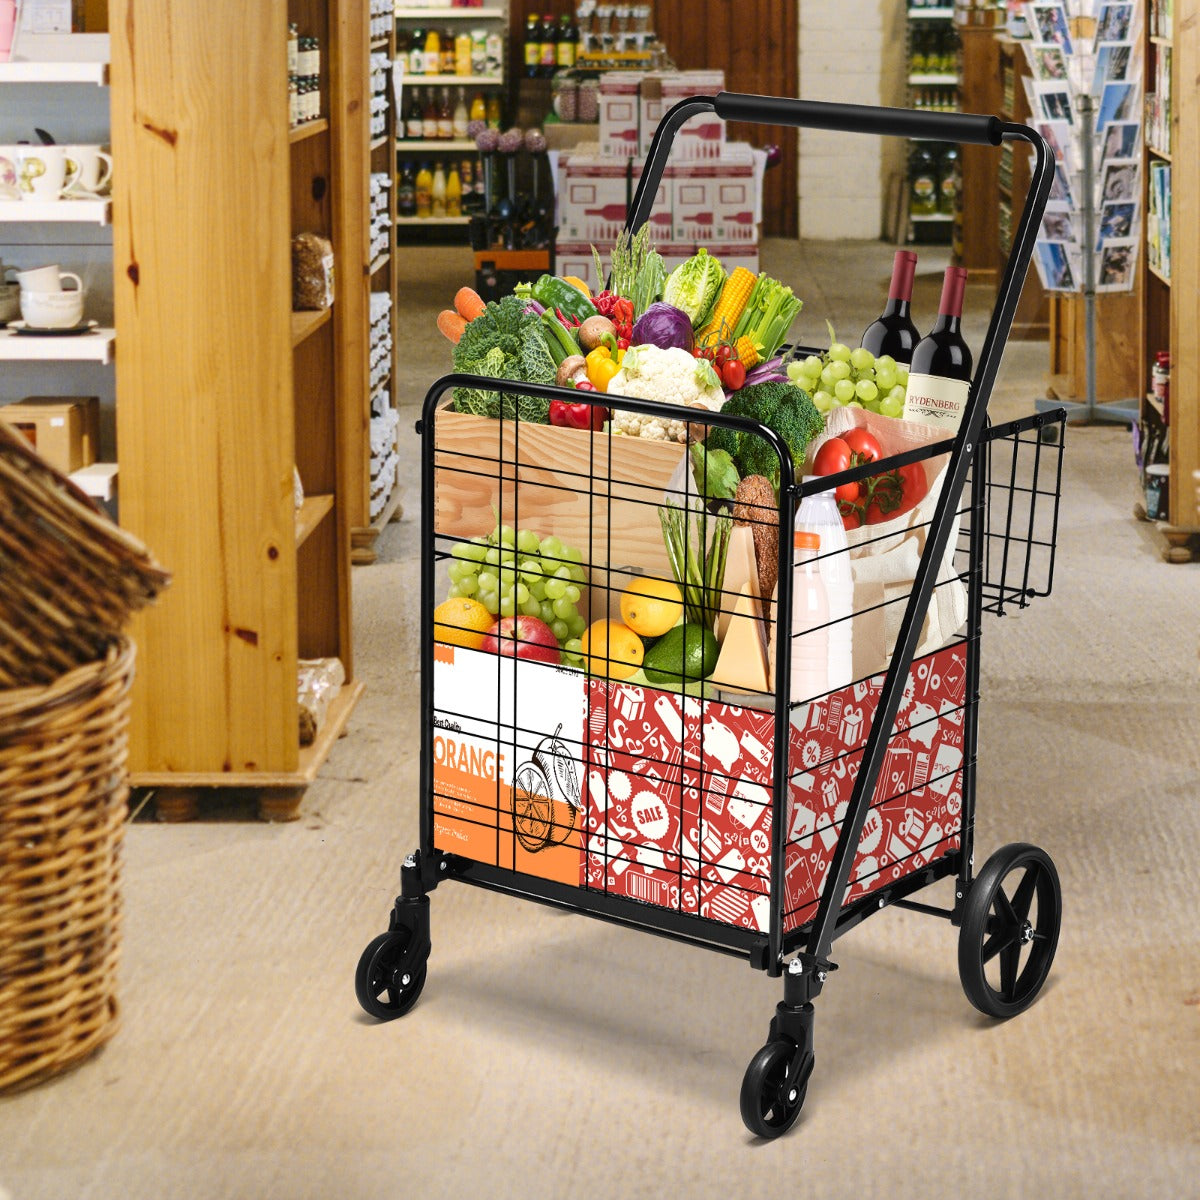 Extra Jumbo Double Basket Cart with 360degree Swivel Rolling Bearing Wheels for Kitchen Grocery Black